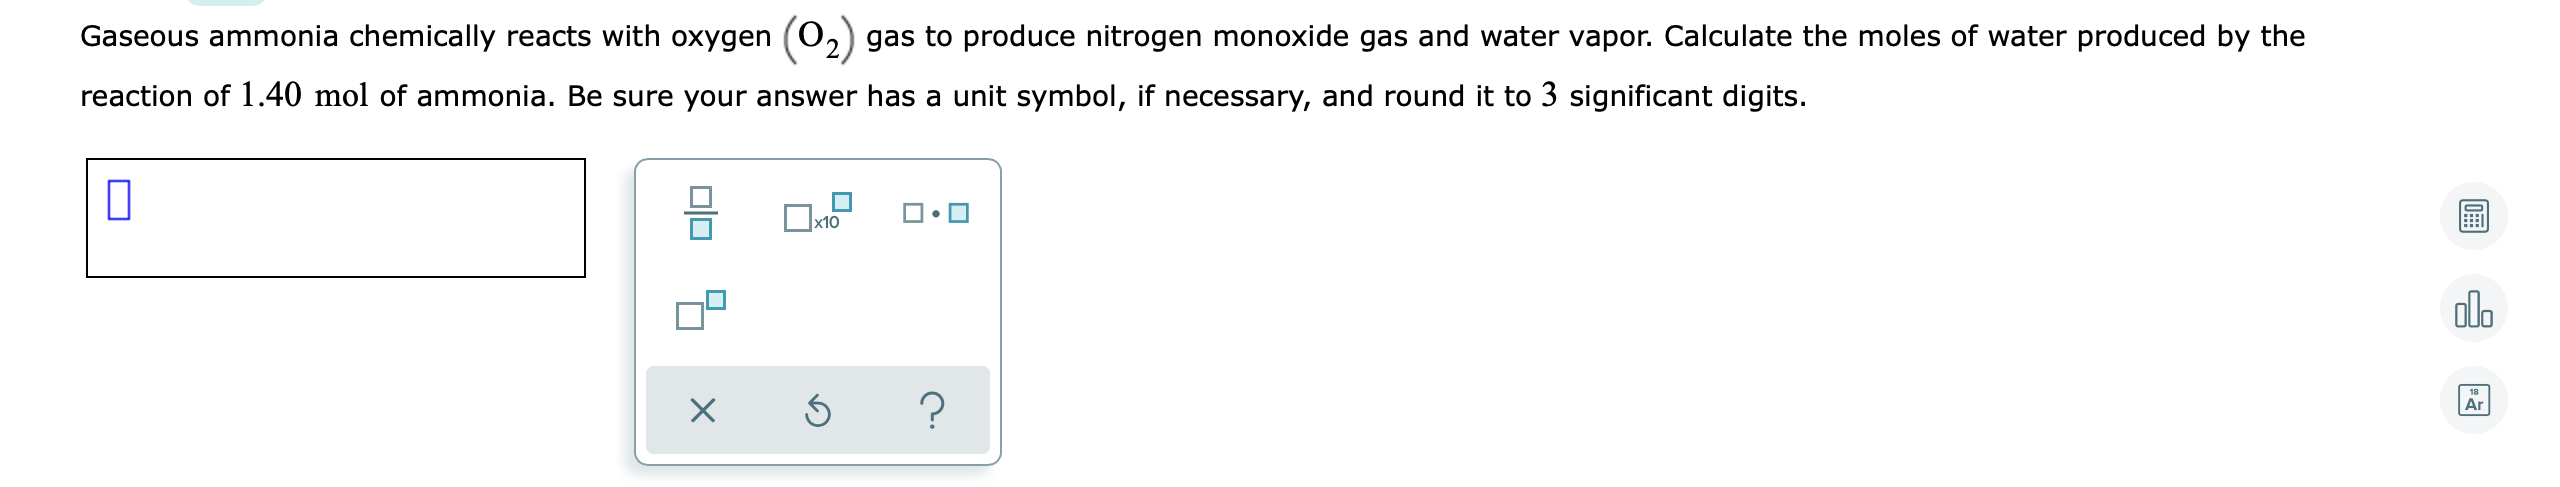 Gaseous ammonia chemically reacts with oxygen (O.
gas to produce nitrogen monoxide gas and water vapor. Calculate the moles of water produced by the
reaction of 1.40 mol of ammonia. Be sure your answer has a unit symbol, if necessary, and round it to 3 significant digits.
x10
